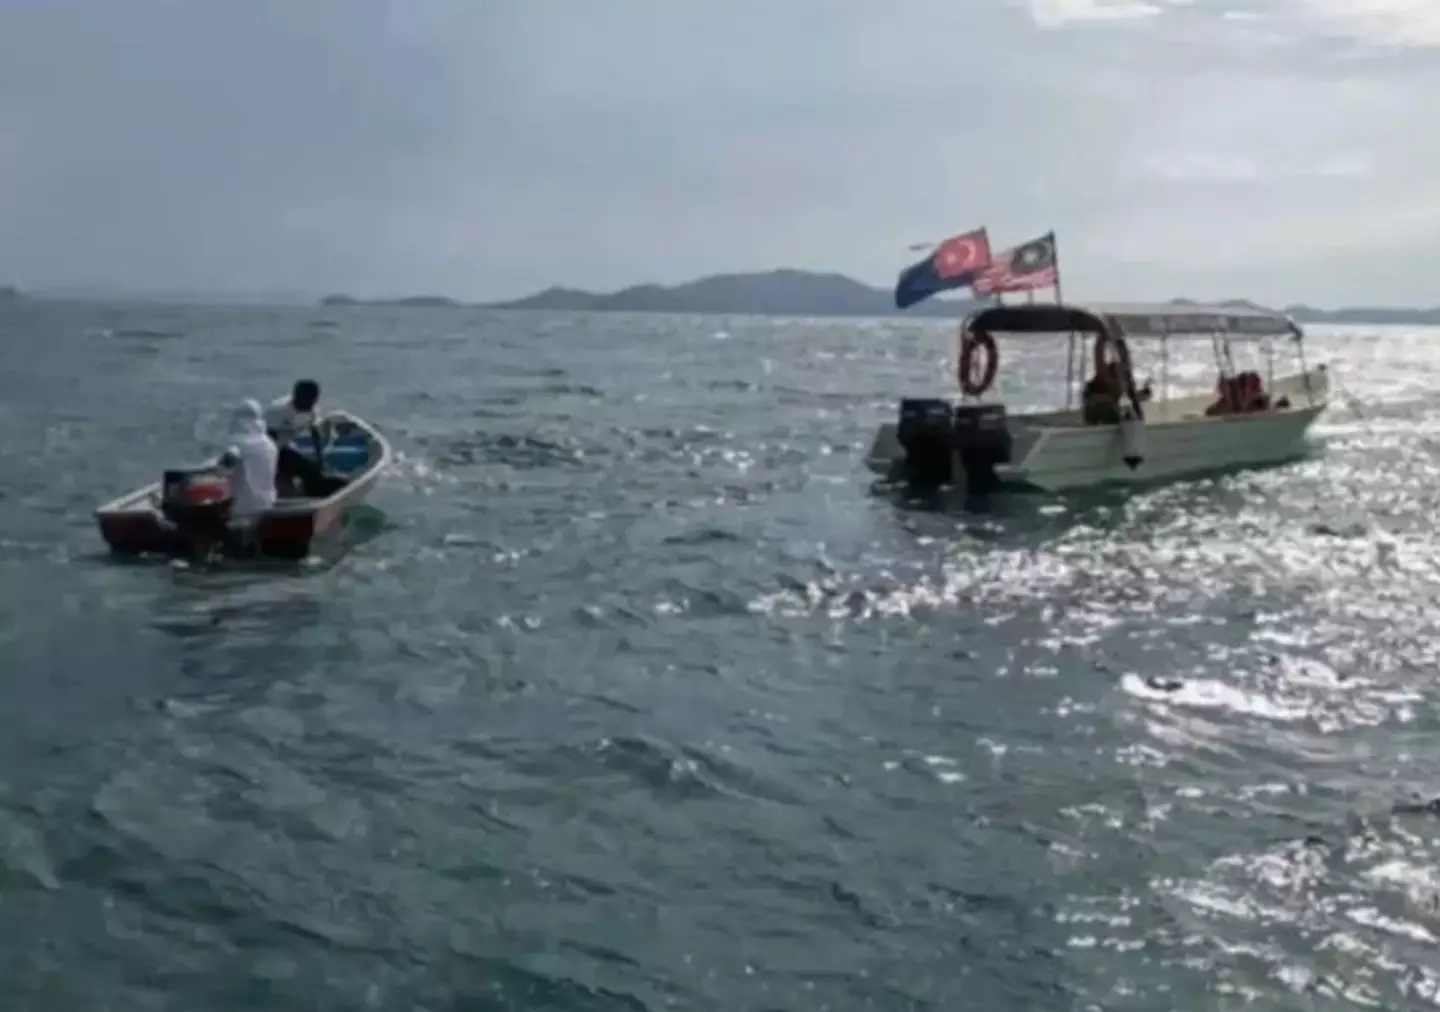 Four divers have been reported missing near a Malaysian island.